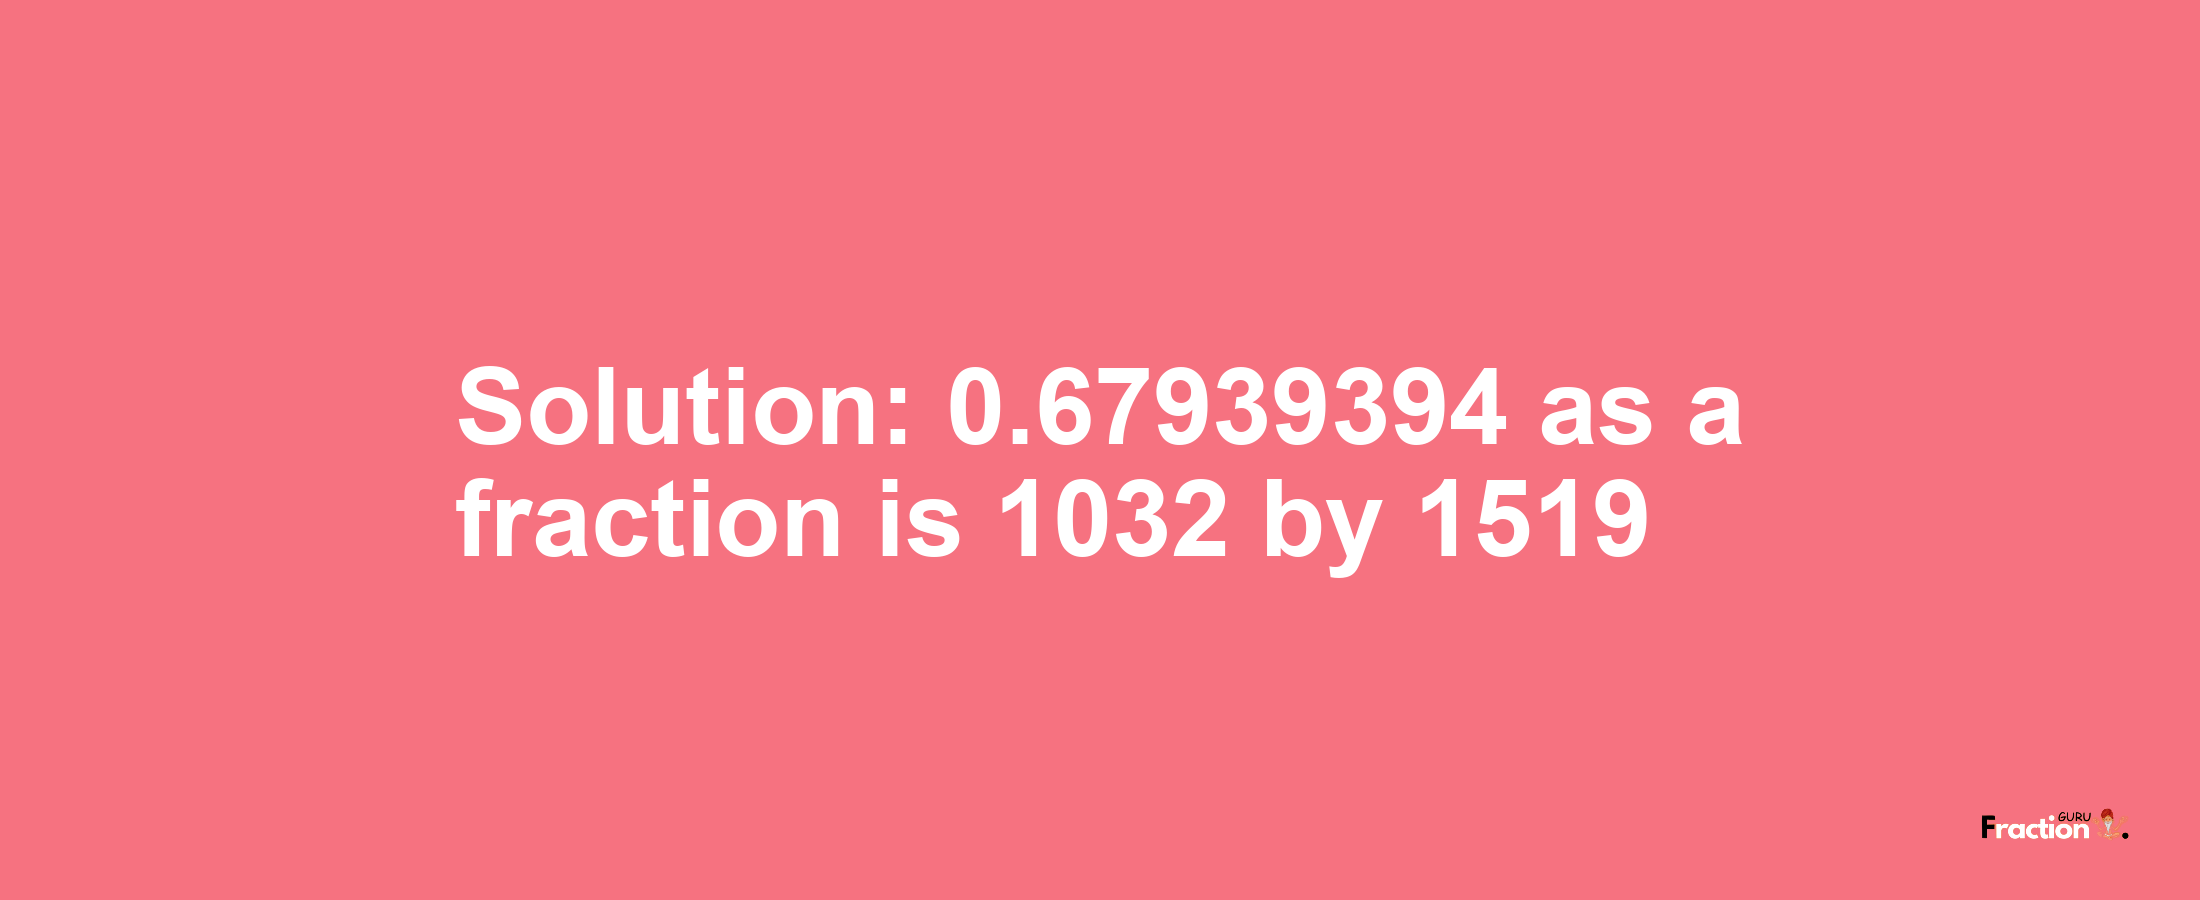 Solution:0.67939394 as a fraction is 1032/1519